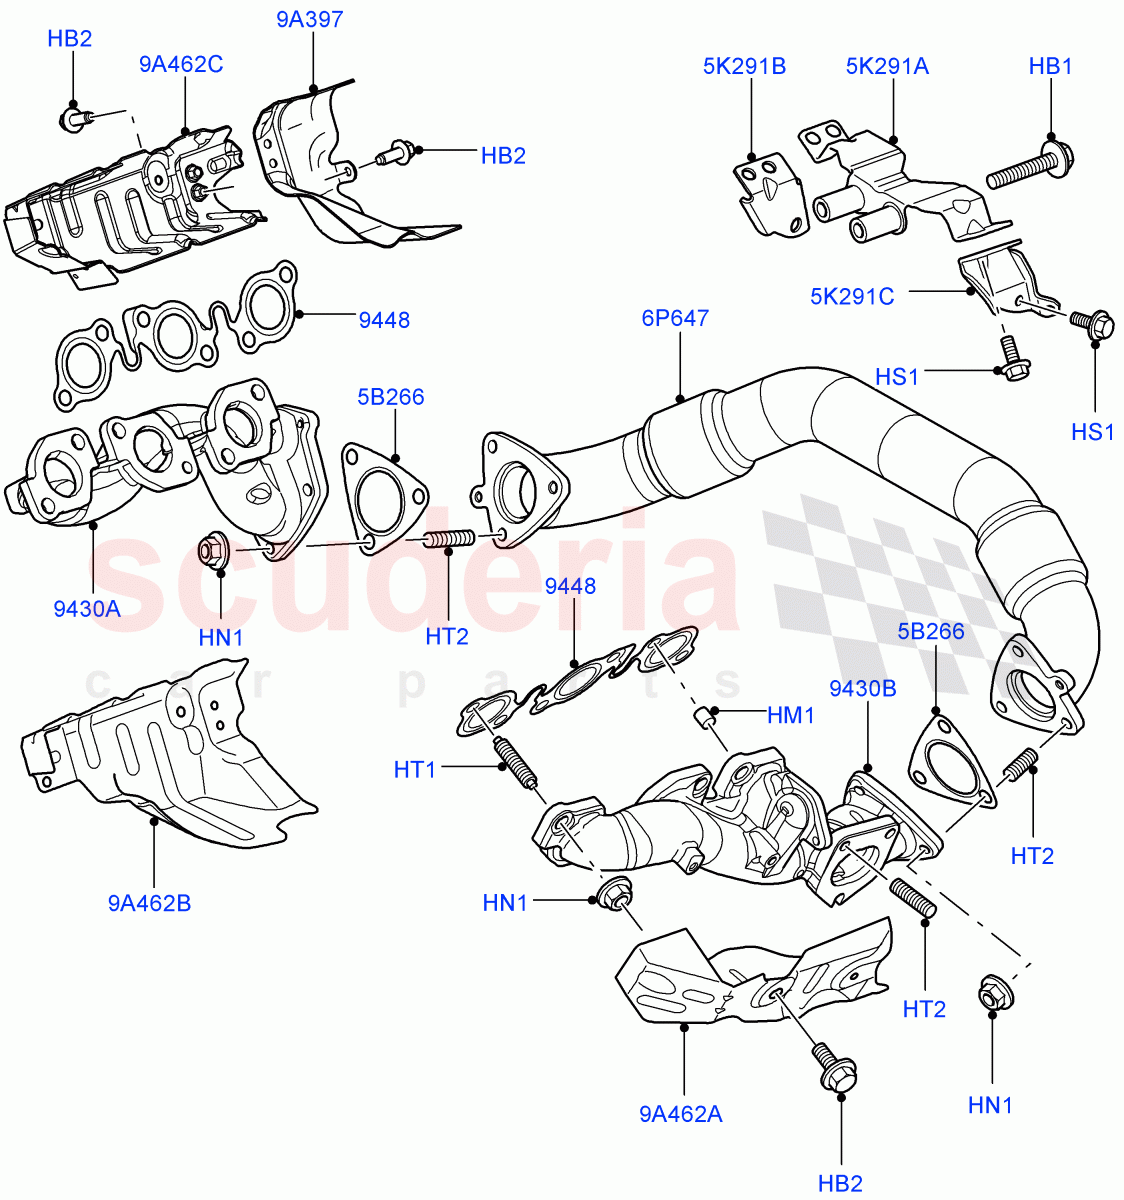 Exhaust Manifold(Lion Diesel 2.7 V6 (140KW))((V)FROMAA000001) of Land Rover Land Rover Discovery 4 (2010-2016) [2.7 Diesel V6]